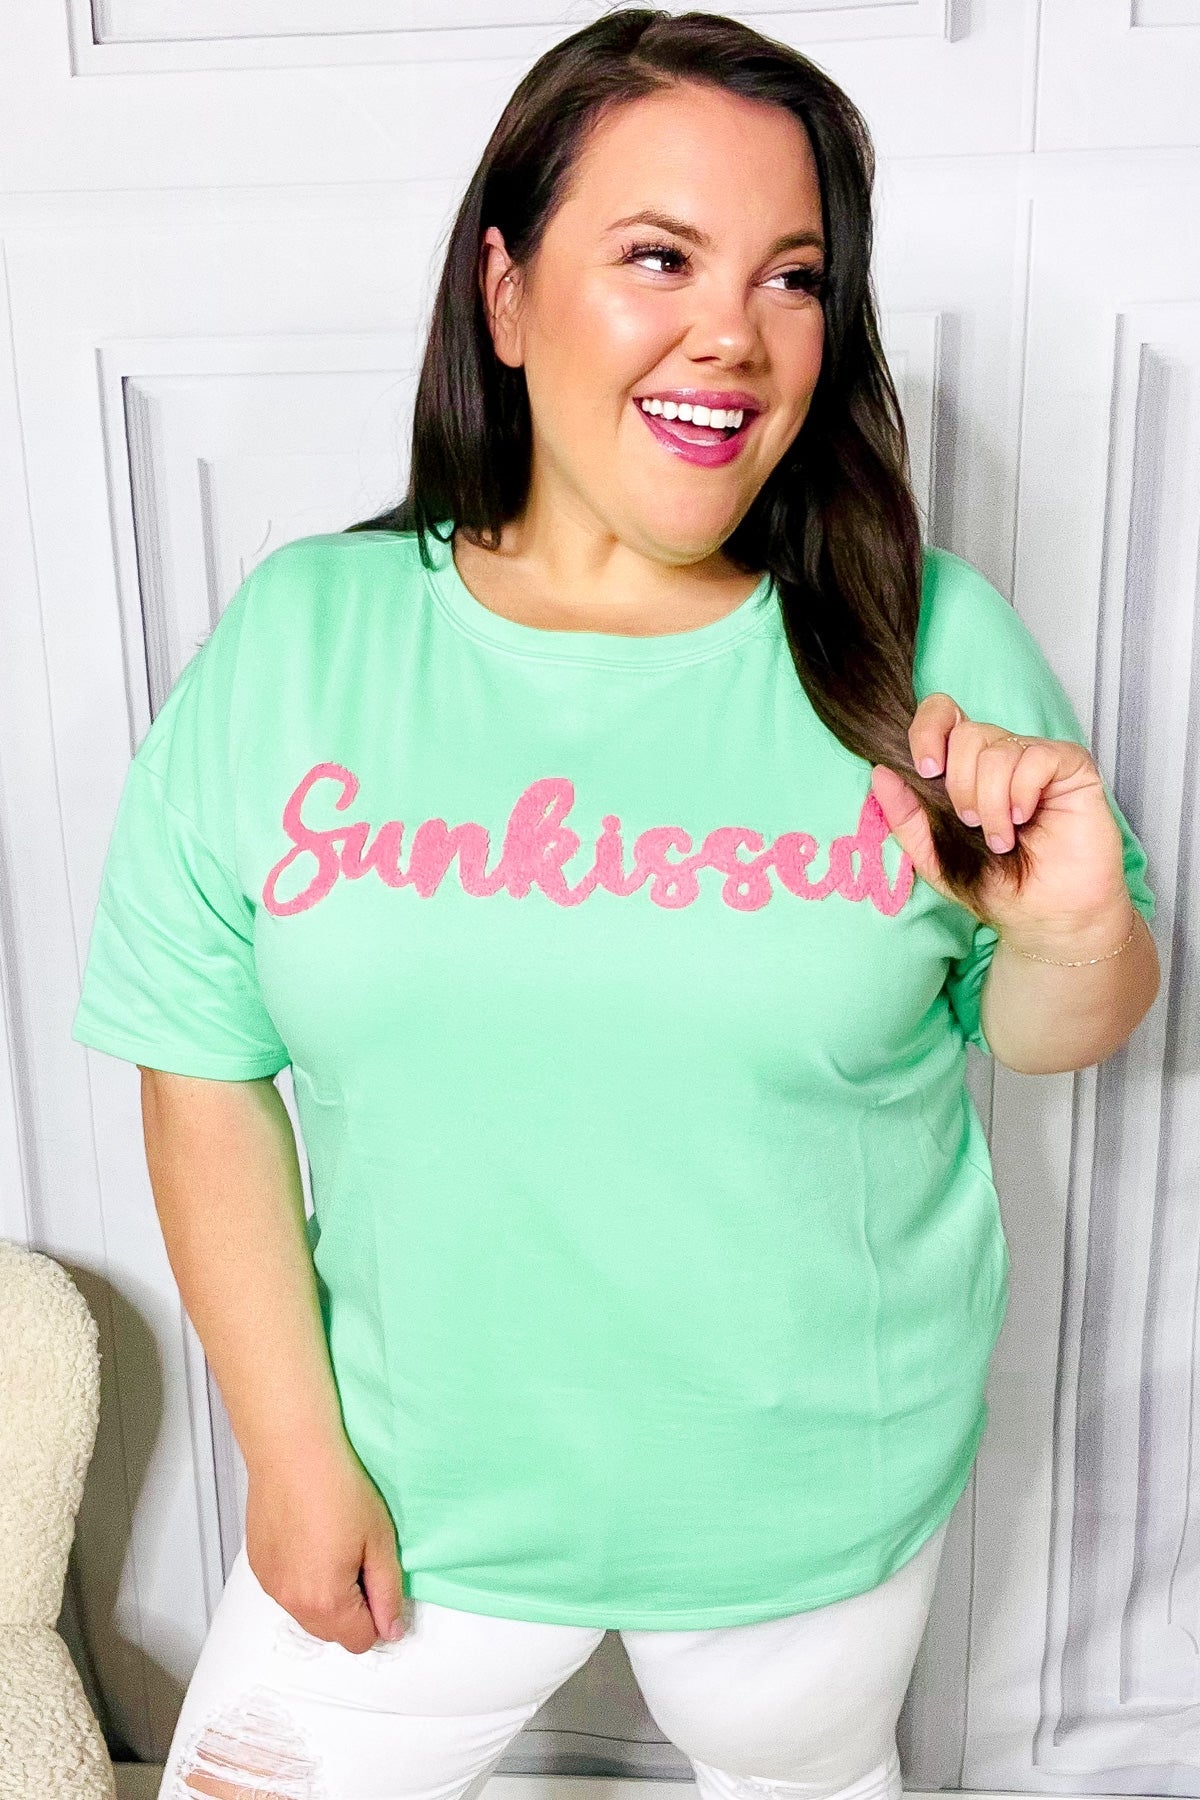 Spunky Mint "Sunkissed" Embroidered French Terry Top Haptics